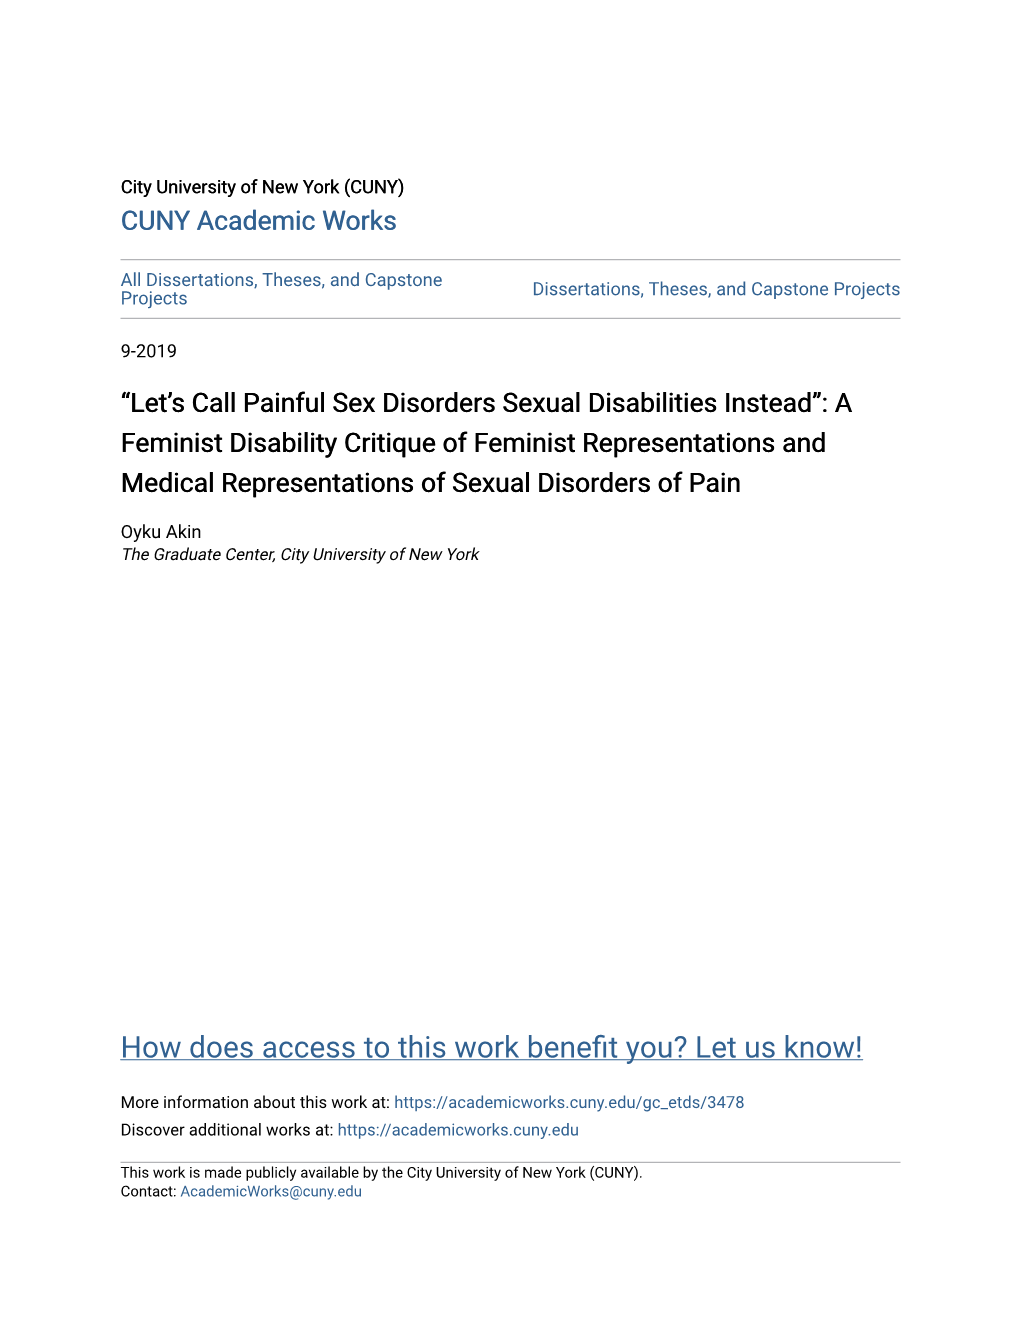 Let's Call Painful Sex Disorders Sexual Disabilities Instead